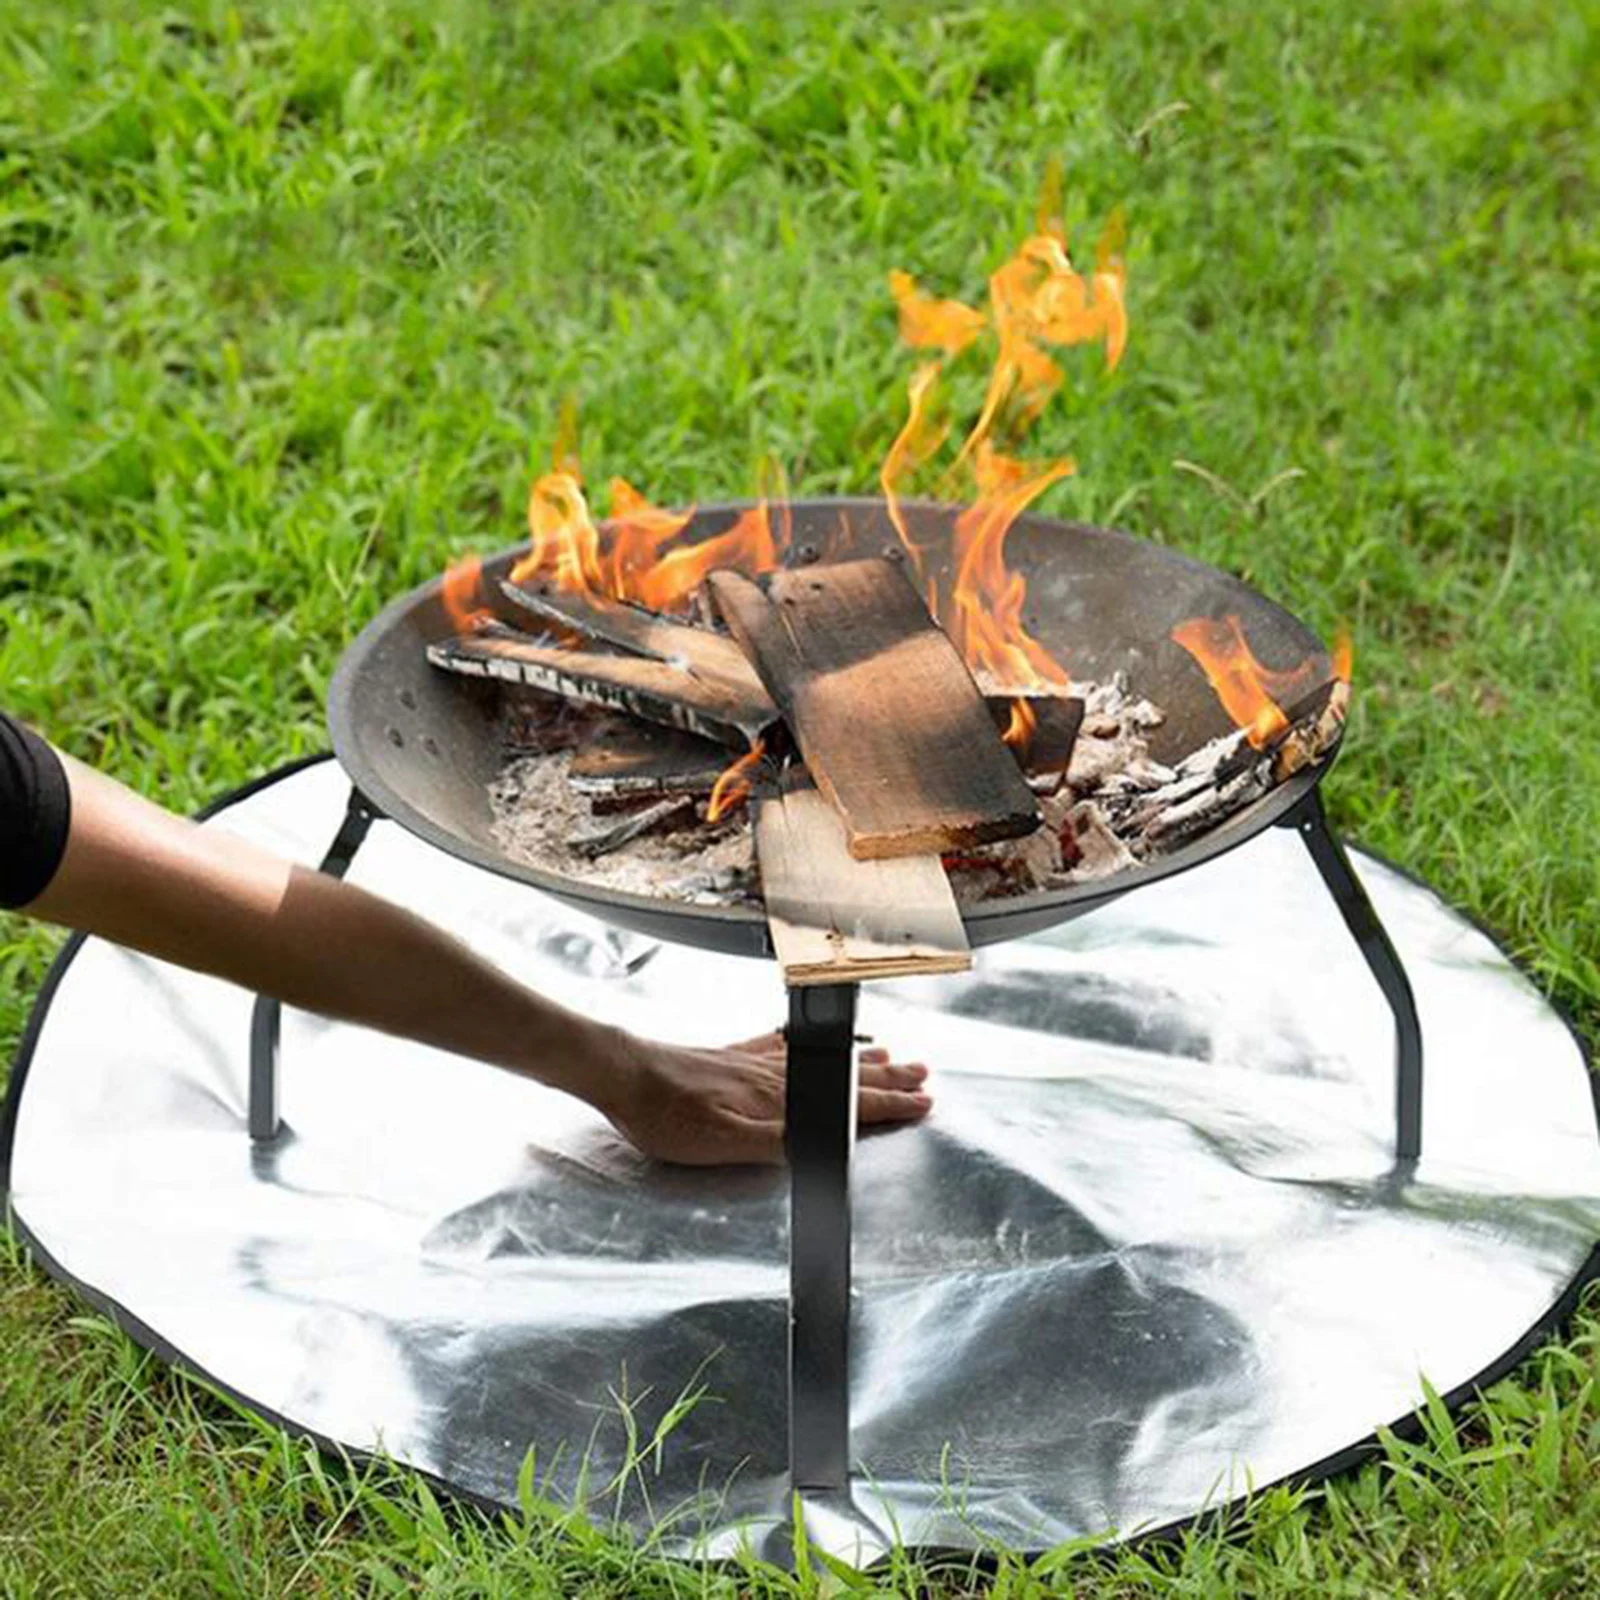 Fire Pit Mat for Deck Patio Fire Pit Pad Fireproof Mat Deck Protector Fire-Resistant Round Wood Burning Grill Mat for Lawn